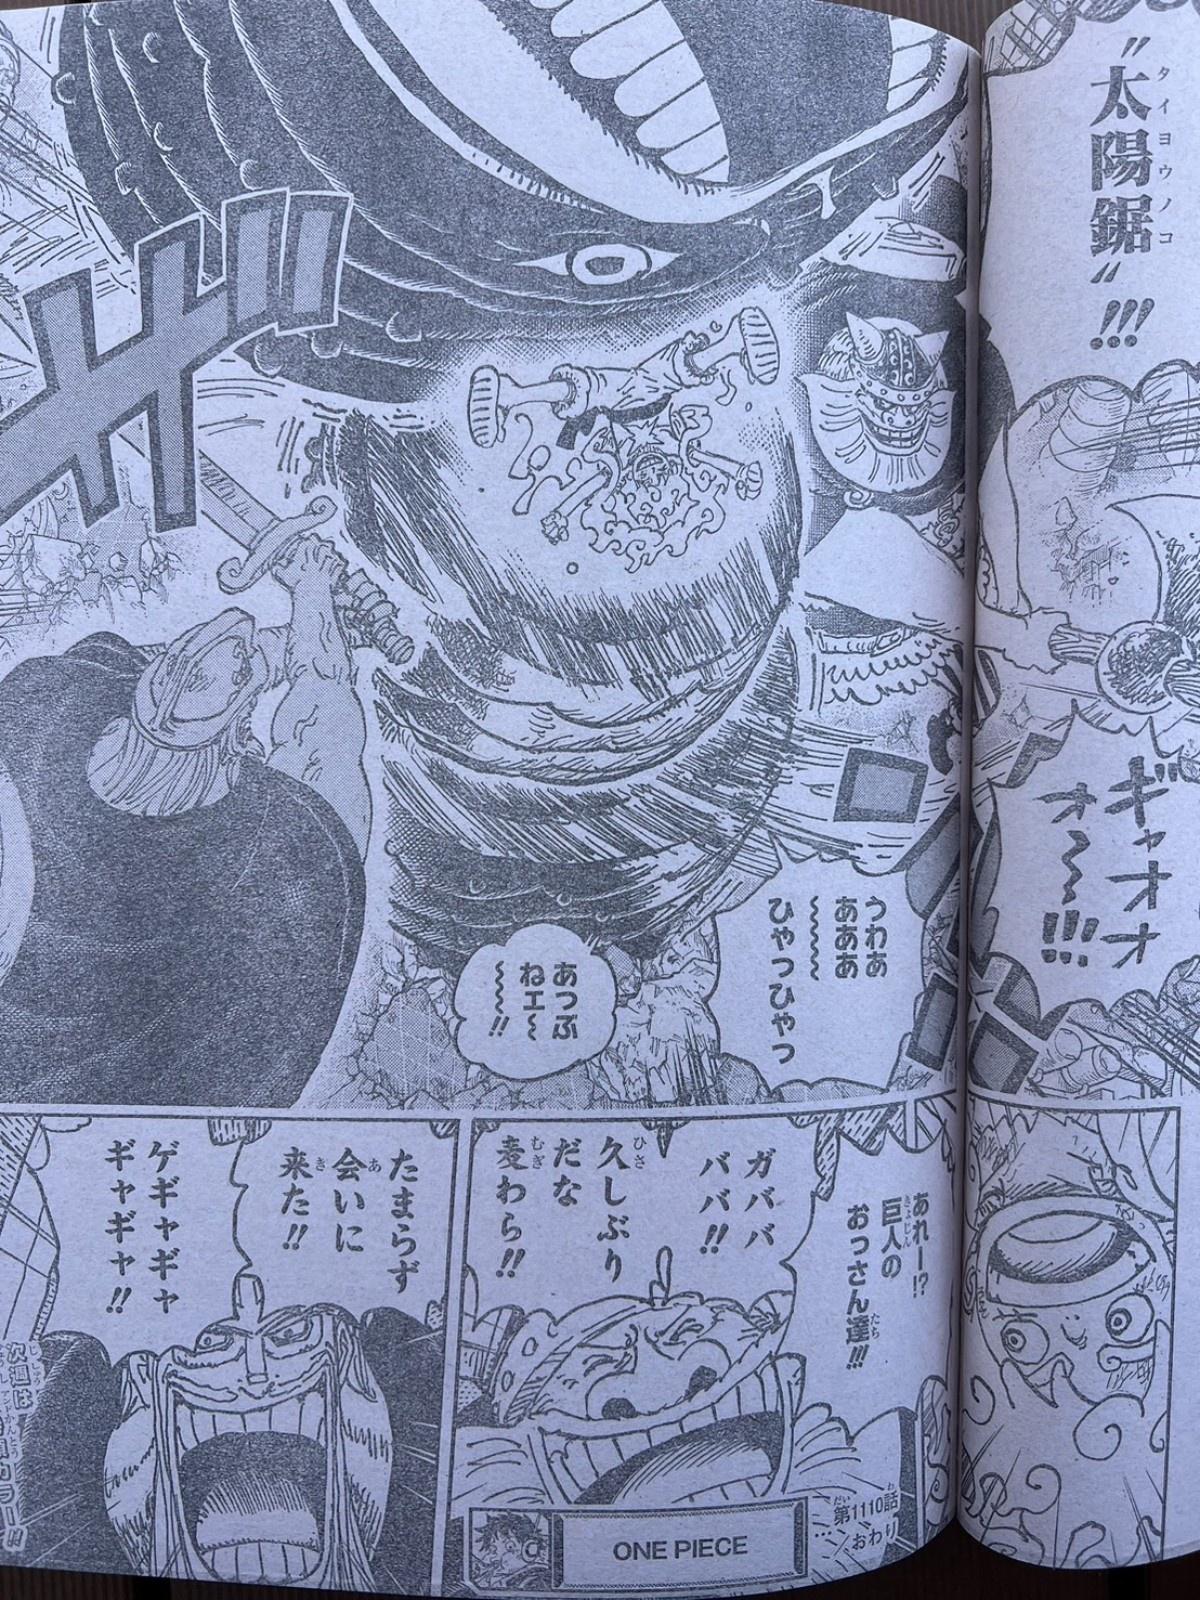 One piece 1110 spoilers